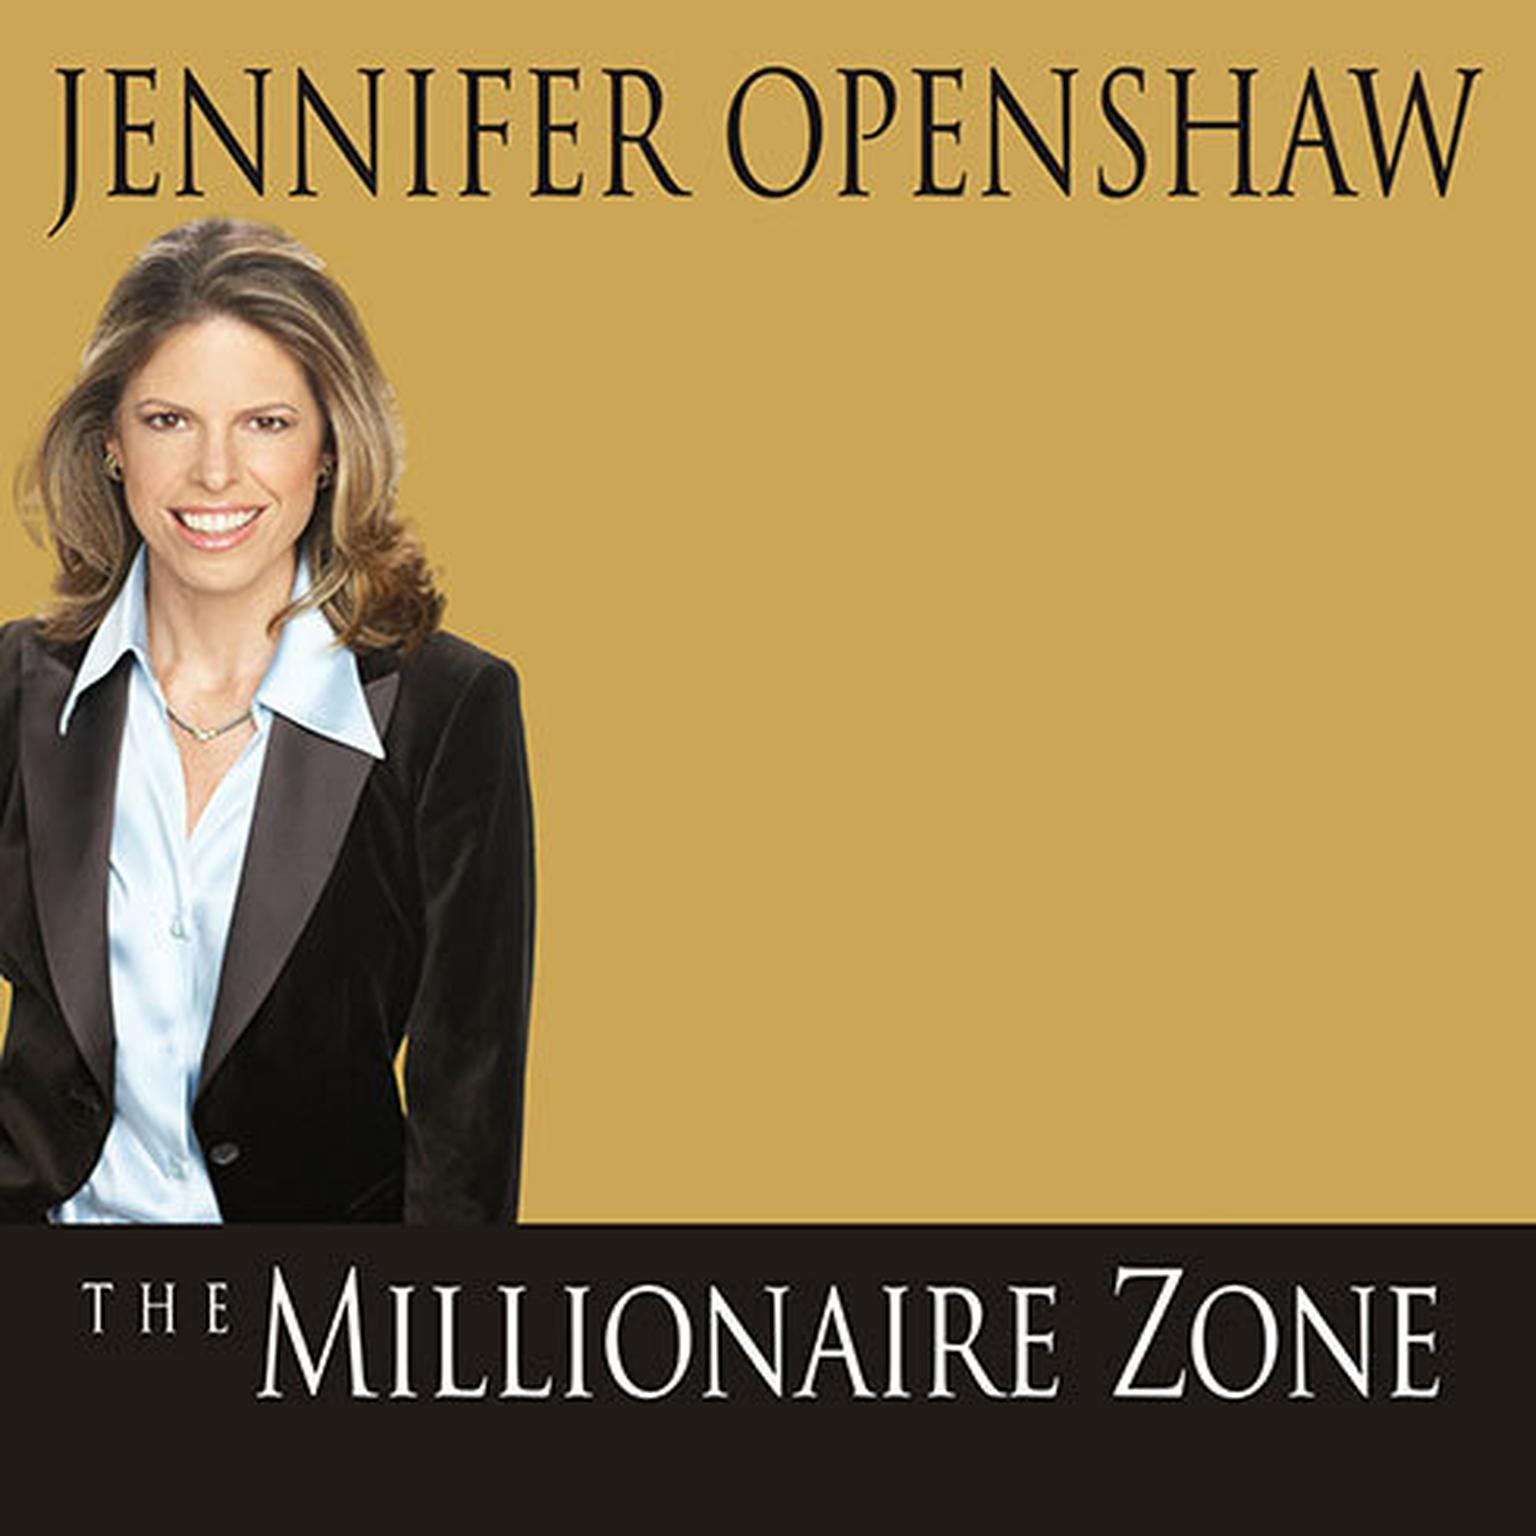 The Millionaire Zone: Seven Winning Steps to a Seven-Figure Fortune Audiobook, by Jennifer Openshaw